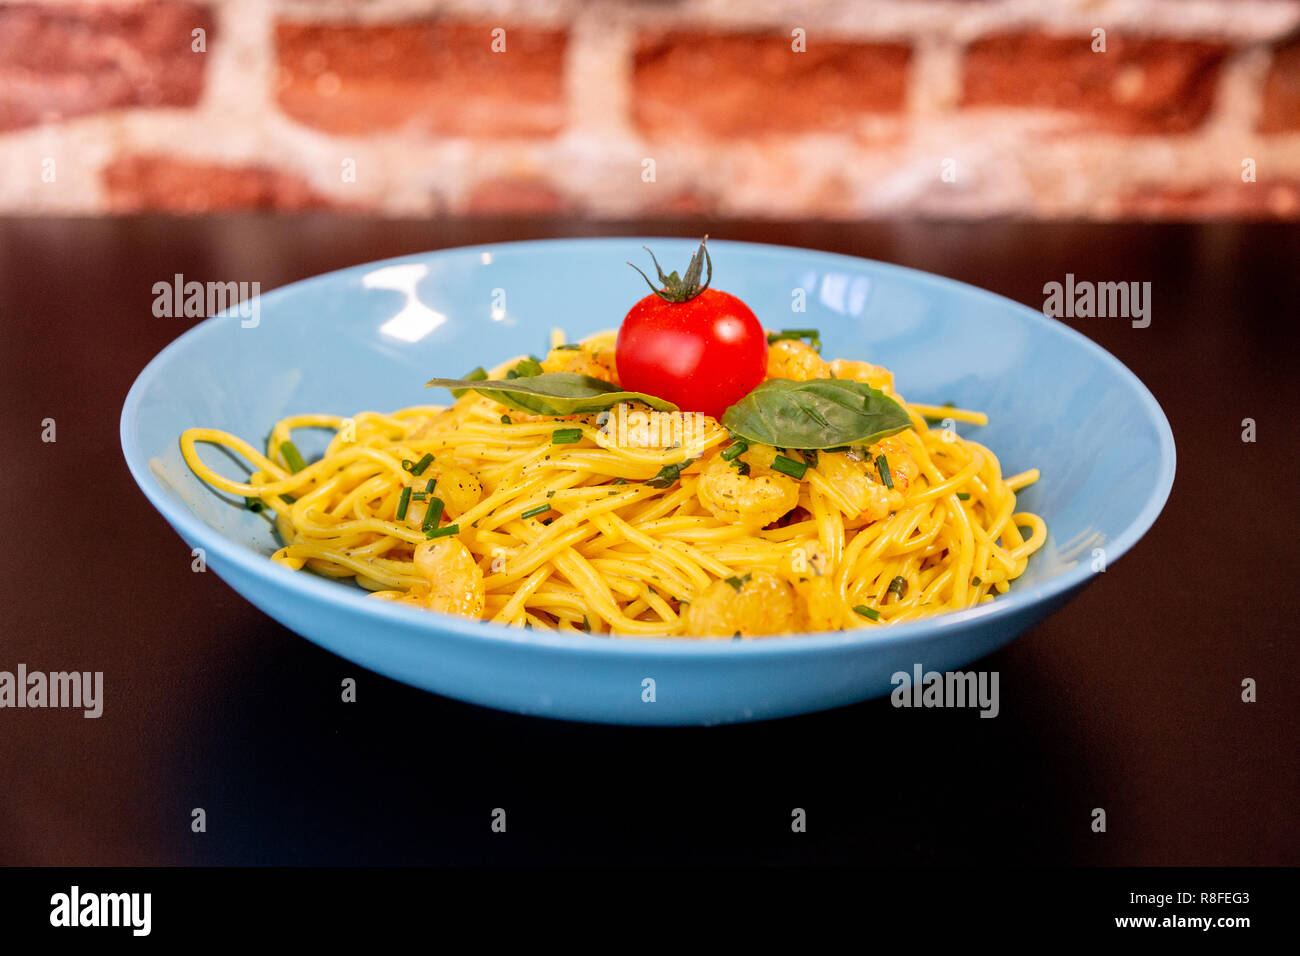 Yellow spaghetti with prawns, a cherry tomato and basil in a blue plate on a black table. With a brick wall. Stock Photo